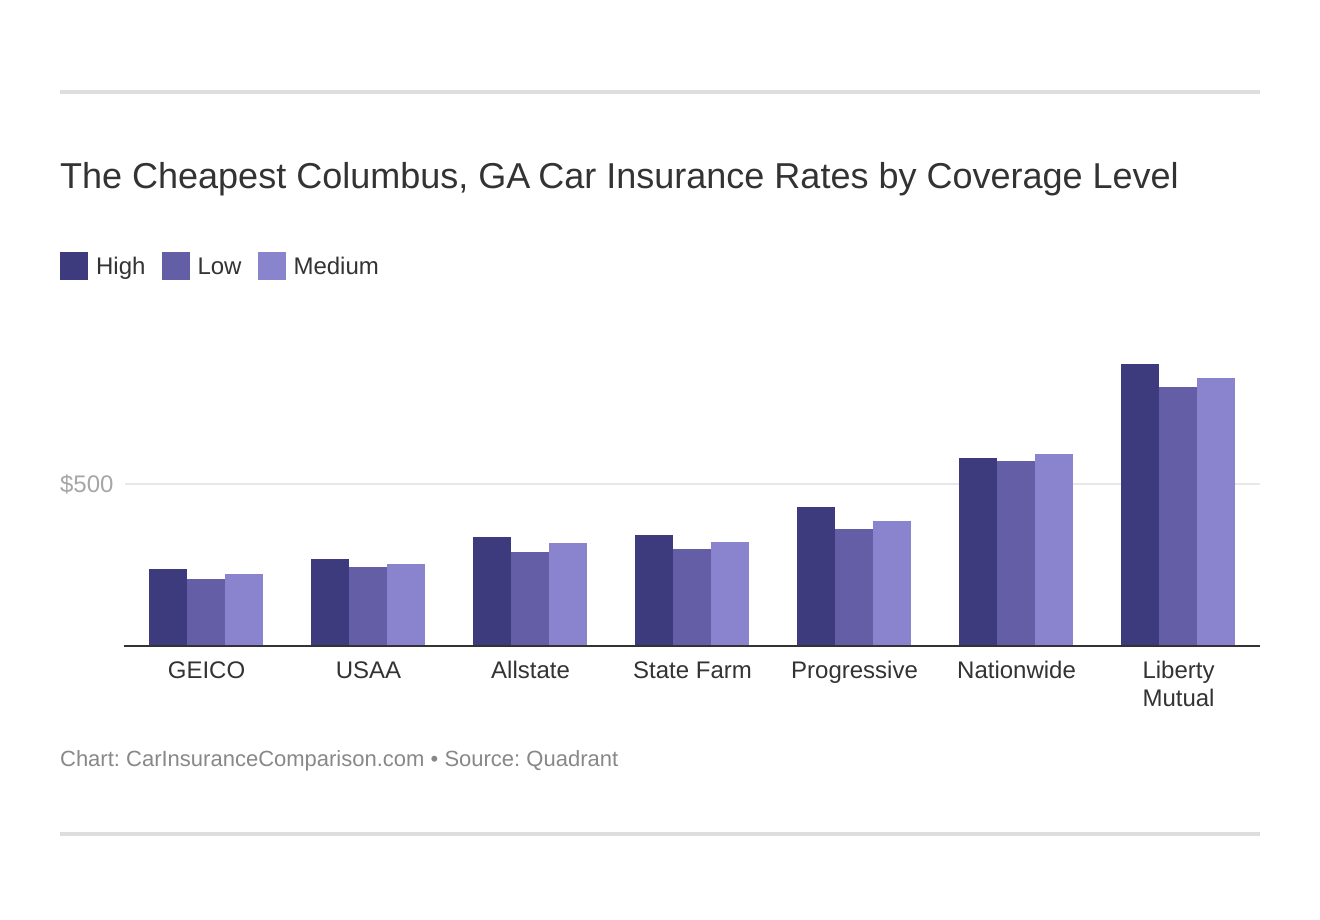 The Cheapest Columbus, GA Car Insurance Rates by Coverage Level